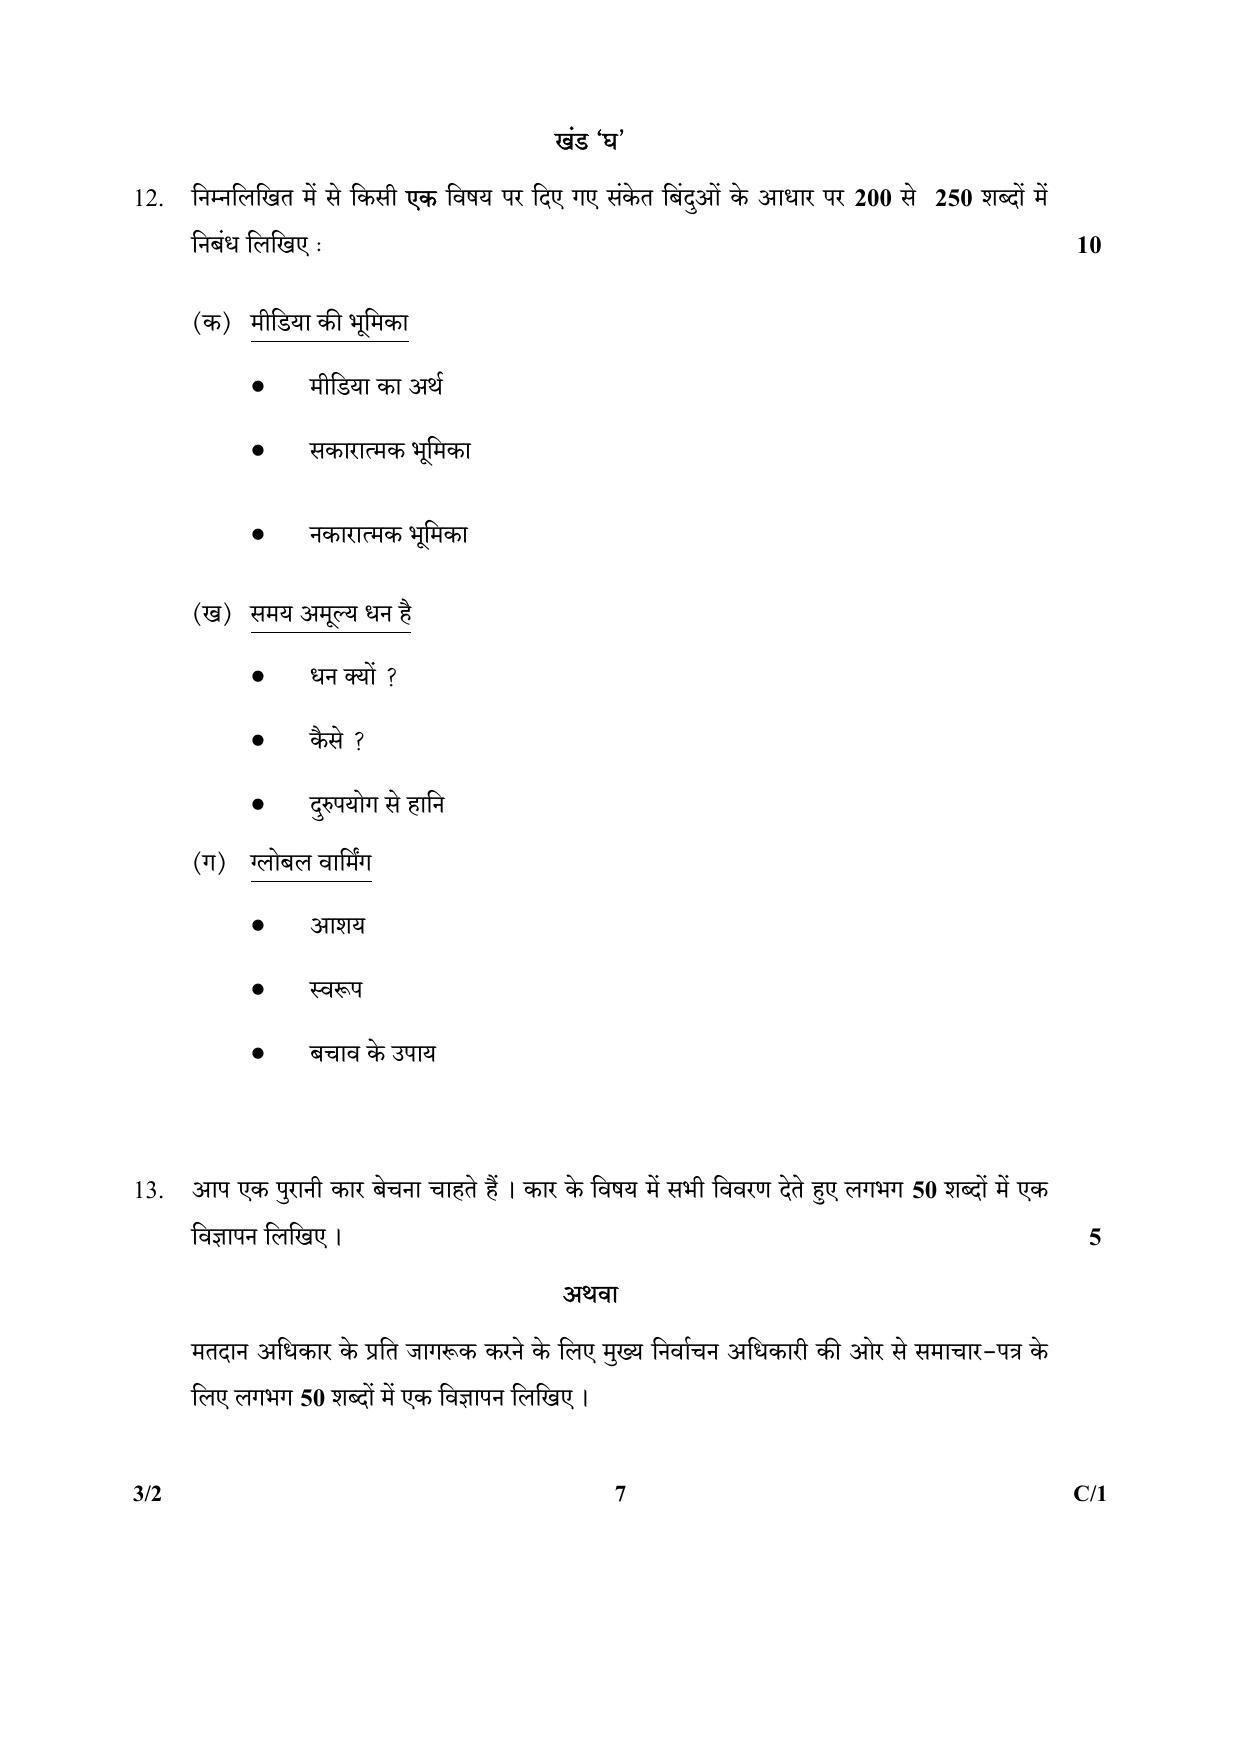 CBSE Class 10 3-2_Hindi 2018 Compartment Question Paper - Page 7